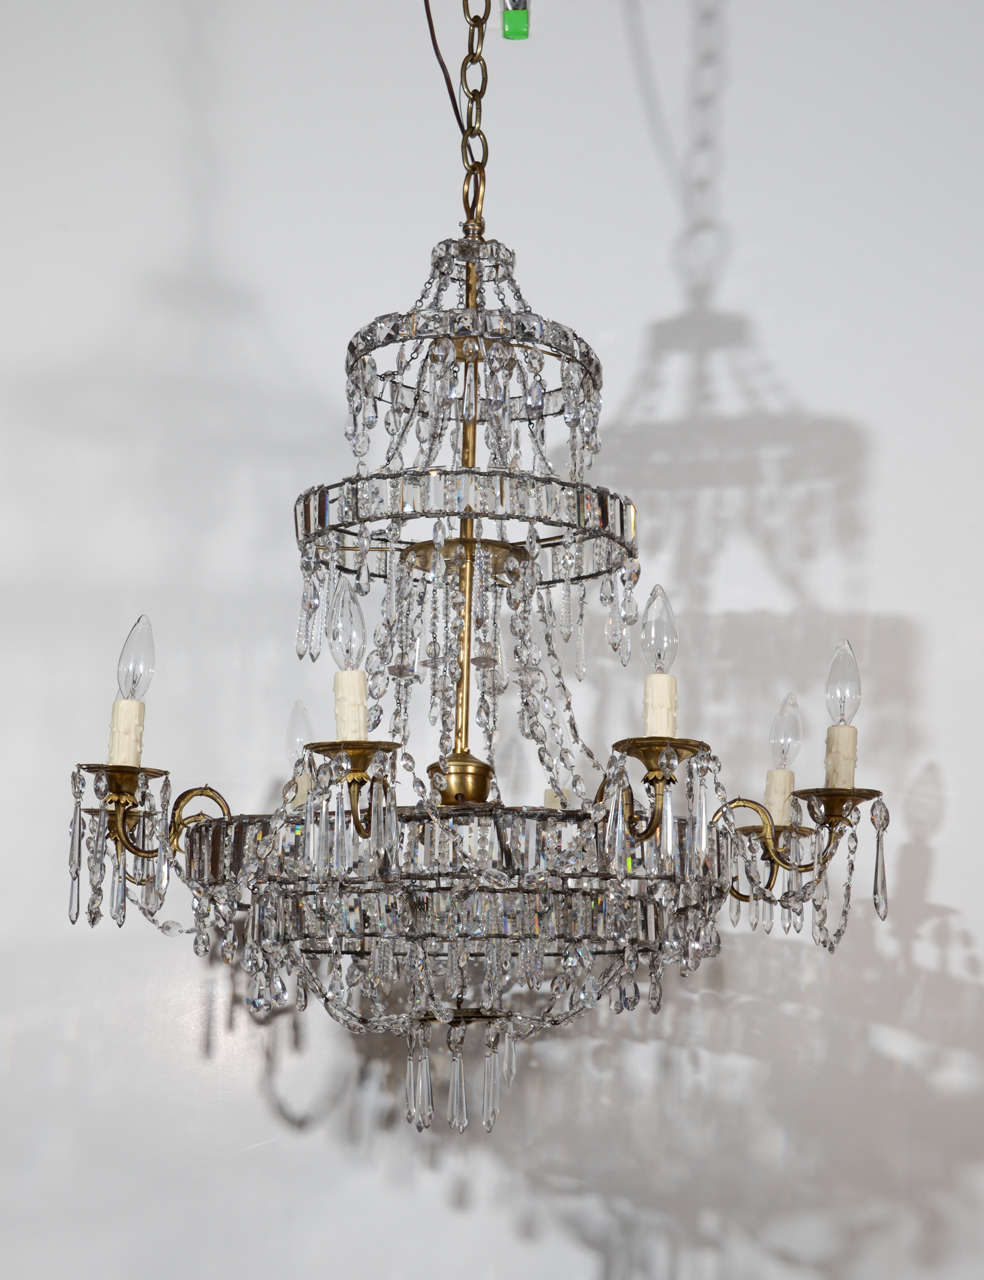 19th c. bronze and crystal chandelier from France. Has been rewired for USA.